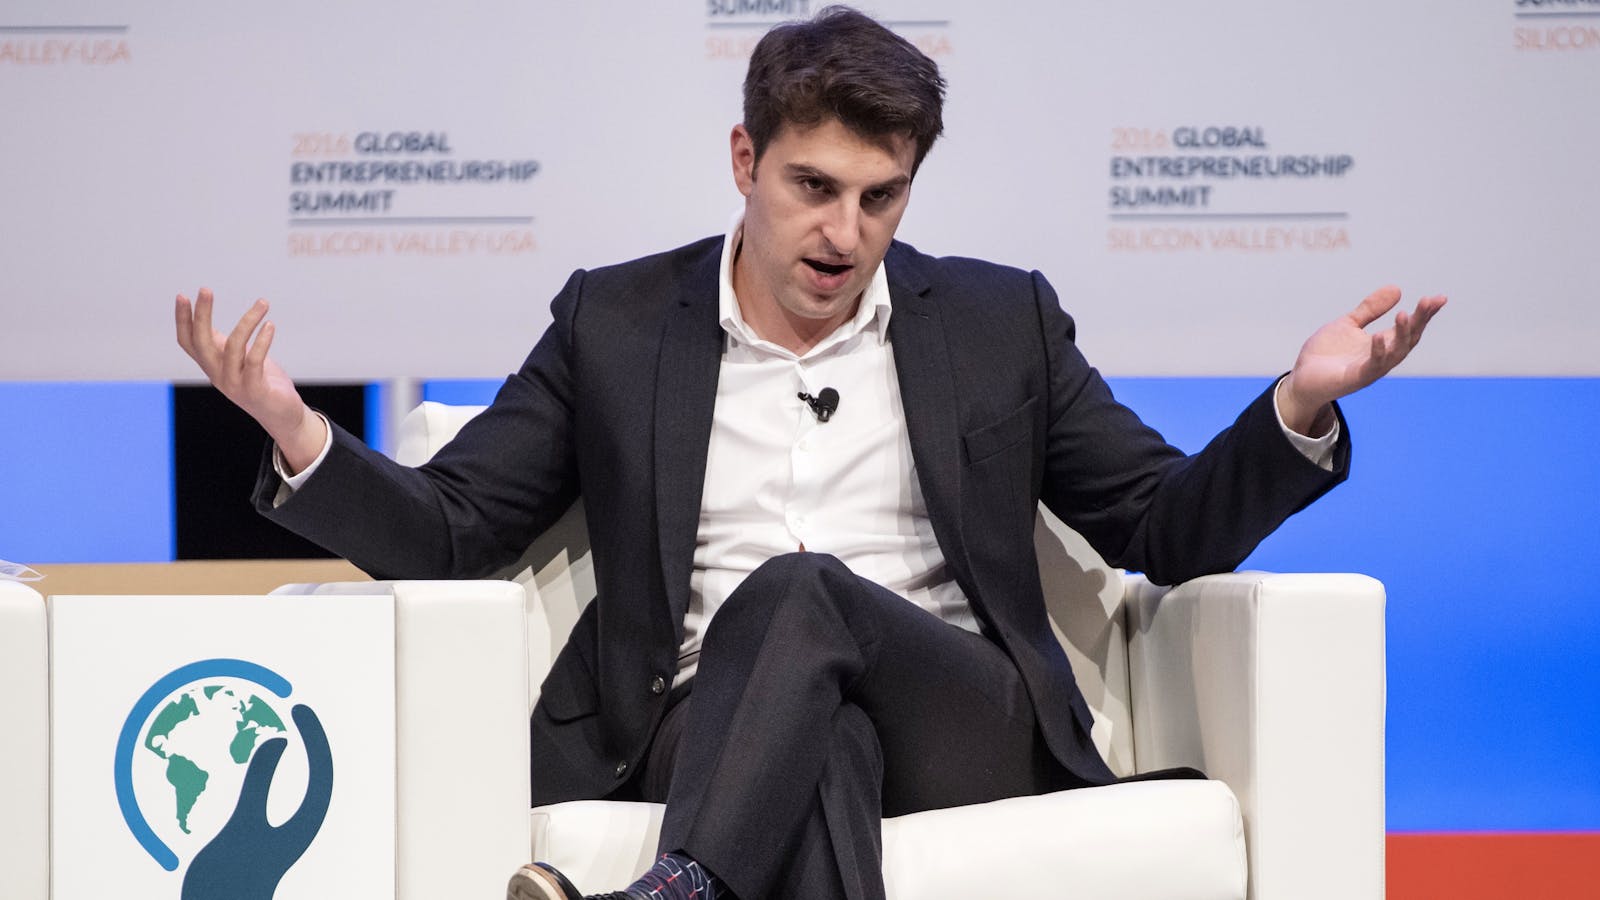 Airbnb CEO Brian Chesky. Photo by Bloomberg.